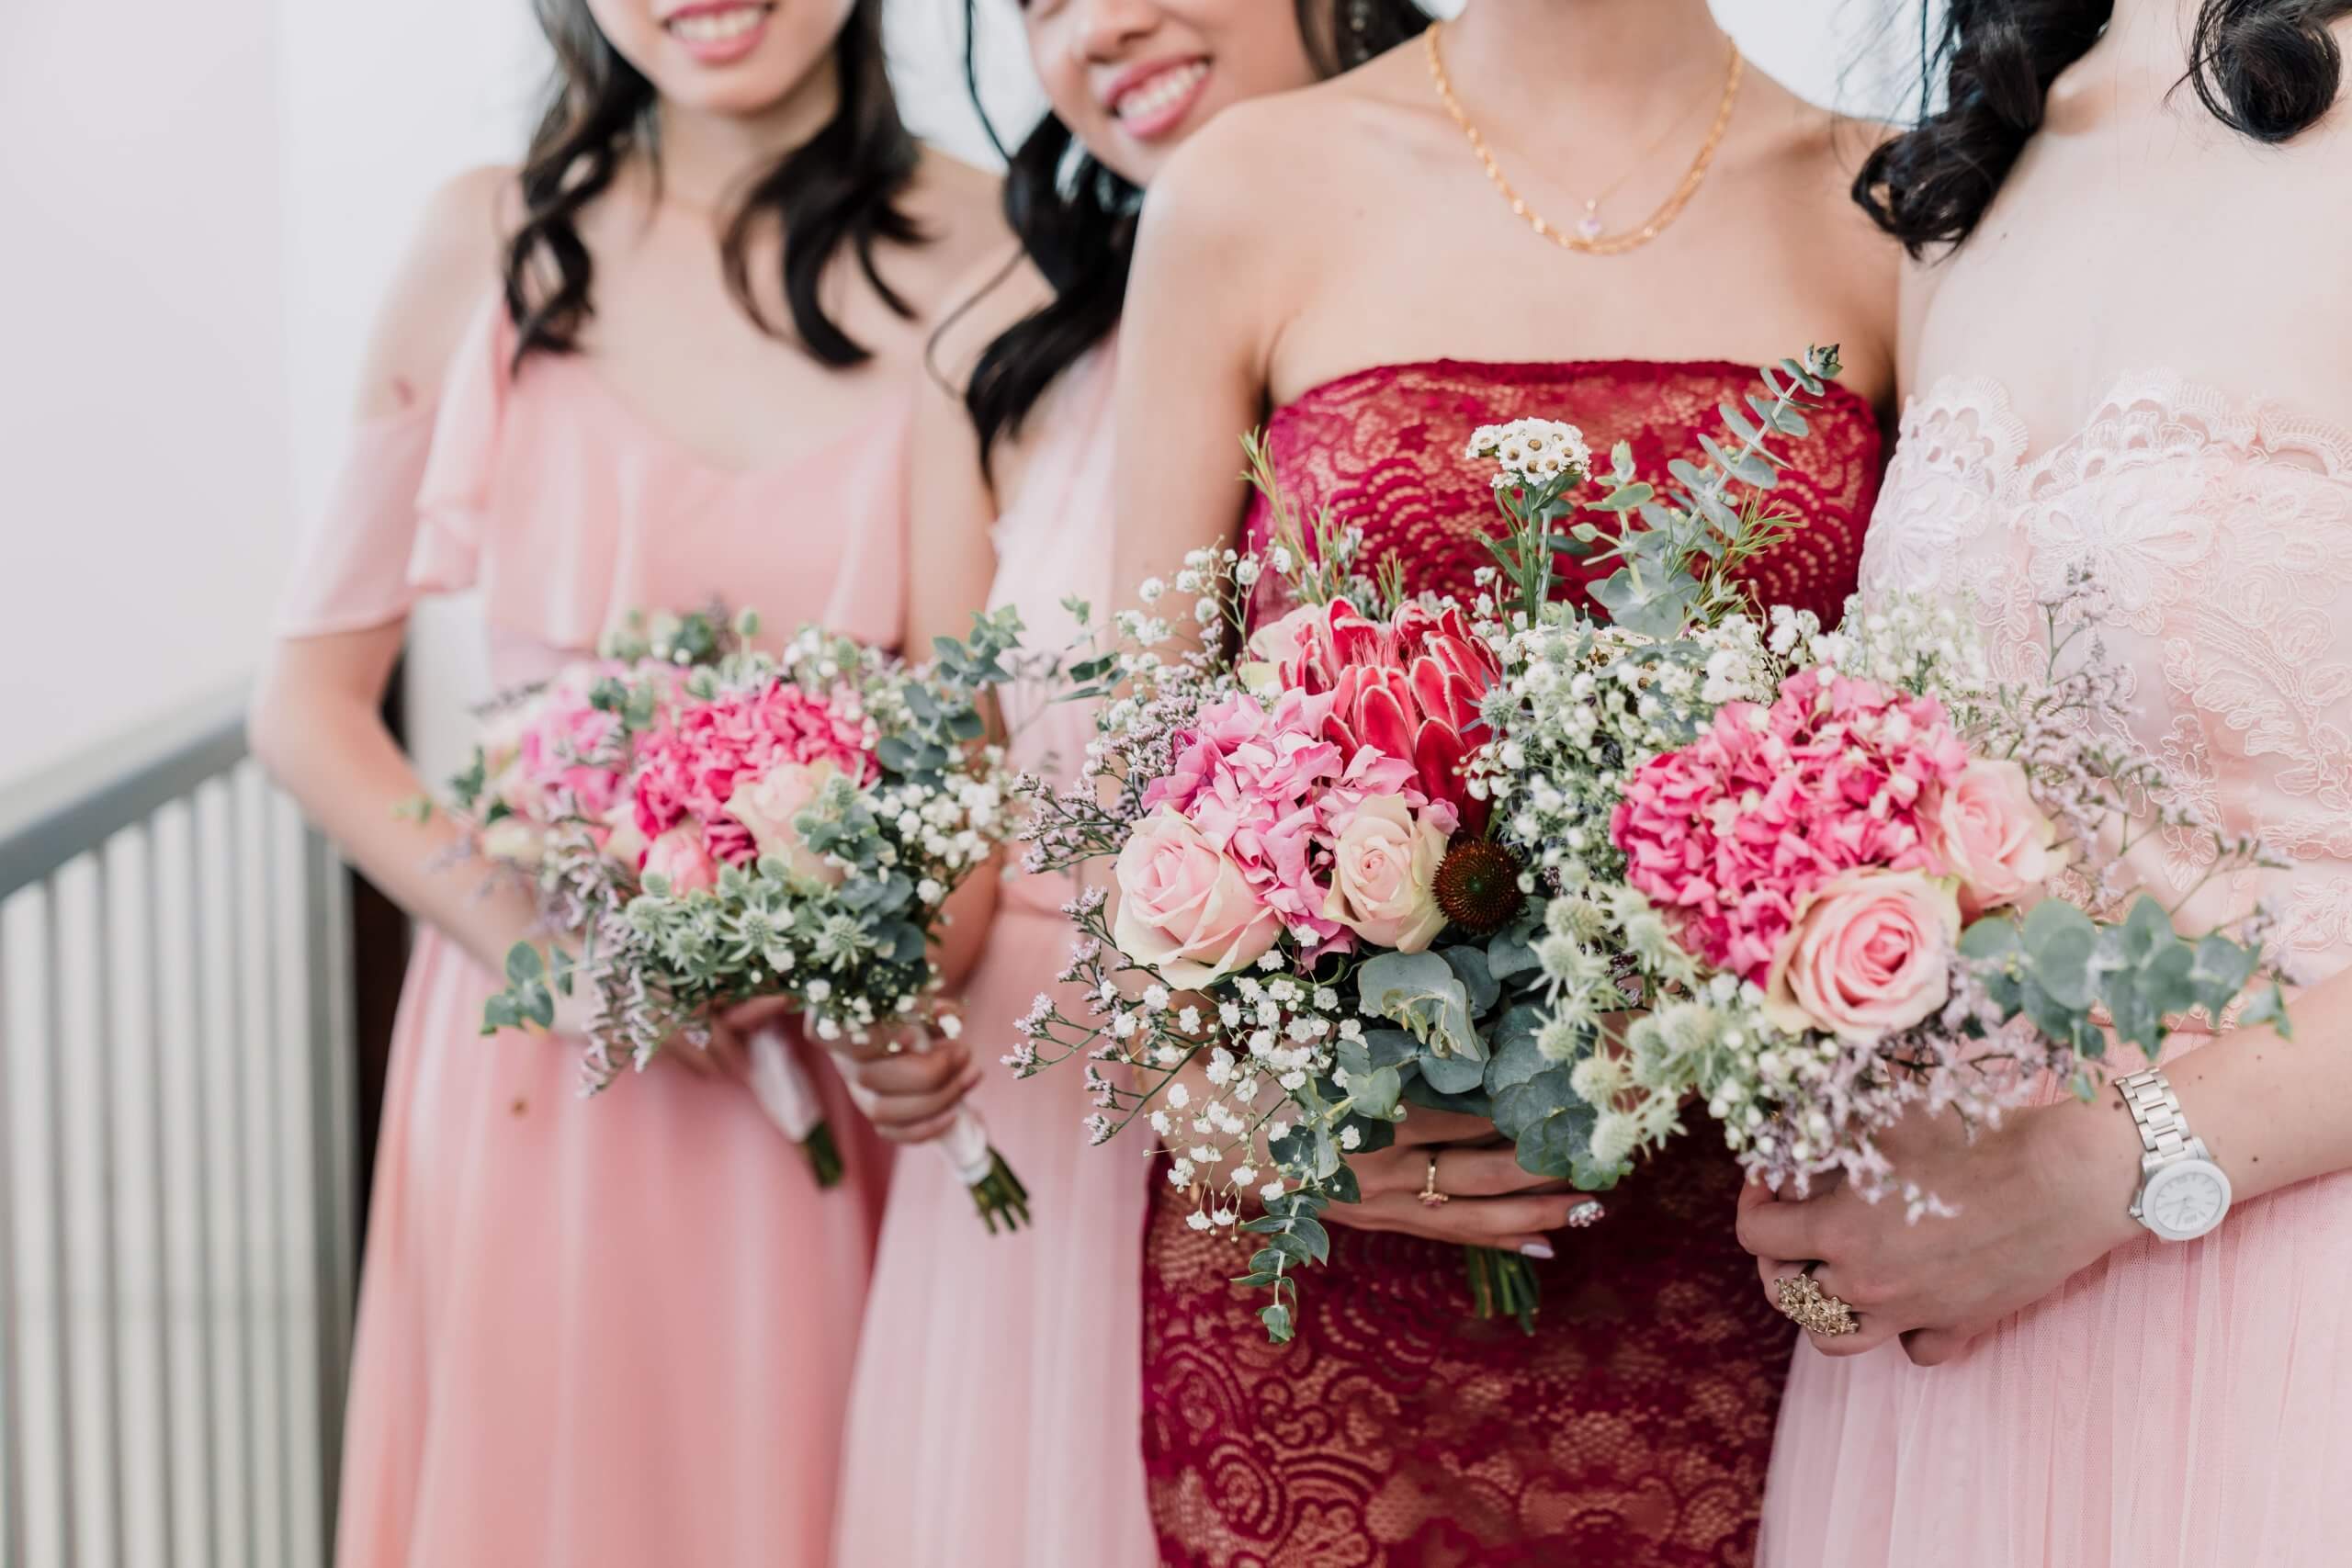 Beautiful bouquet of pink, red, and peach colored roses and carnations held in the hands of the bride and her bridesmaids